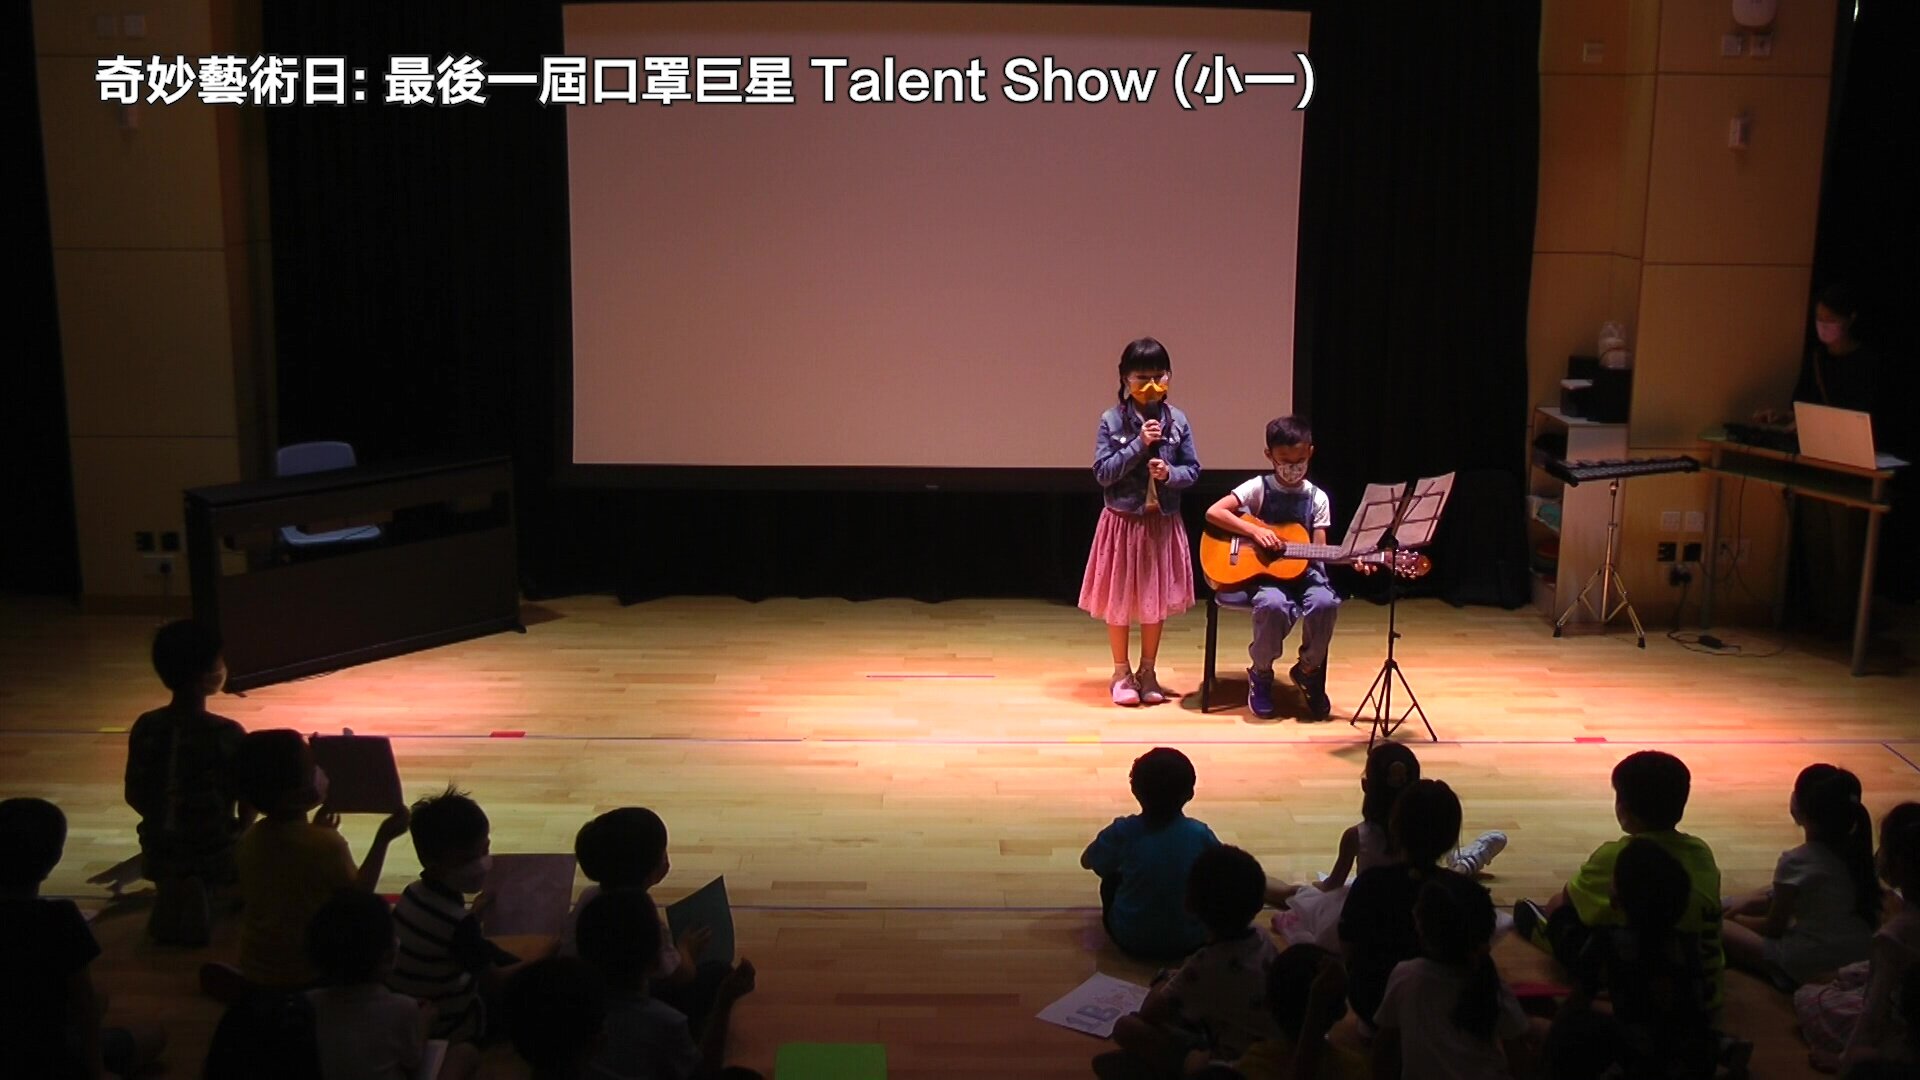 Awesome Arts Day: Talent Show (P1)